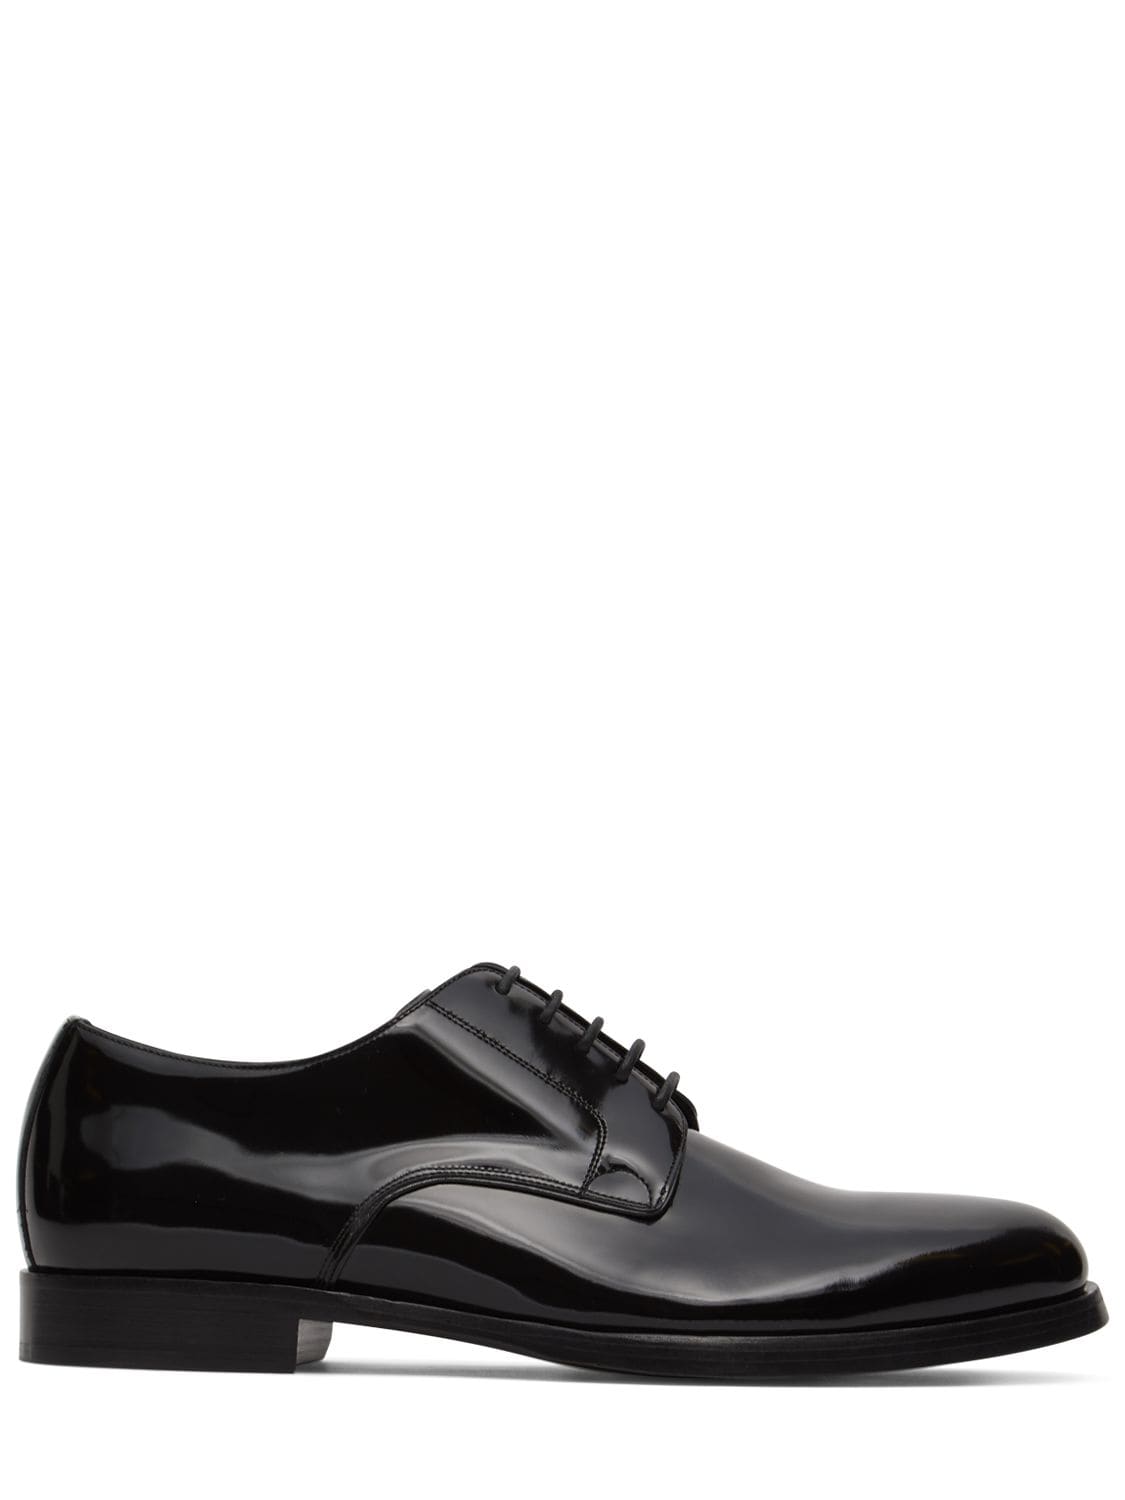 Image of Formal Leather Derby Shoes